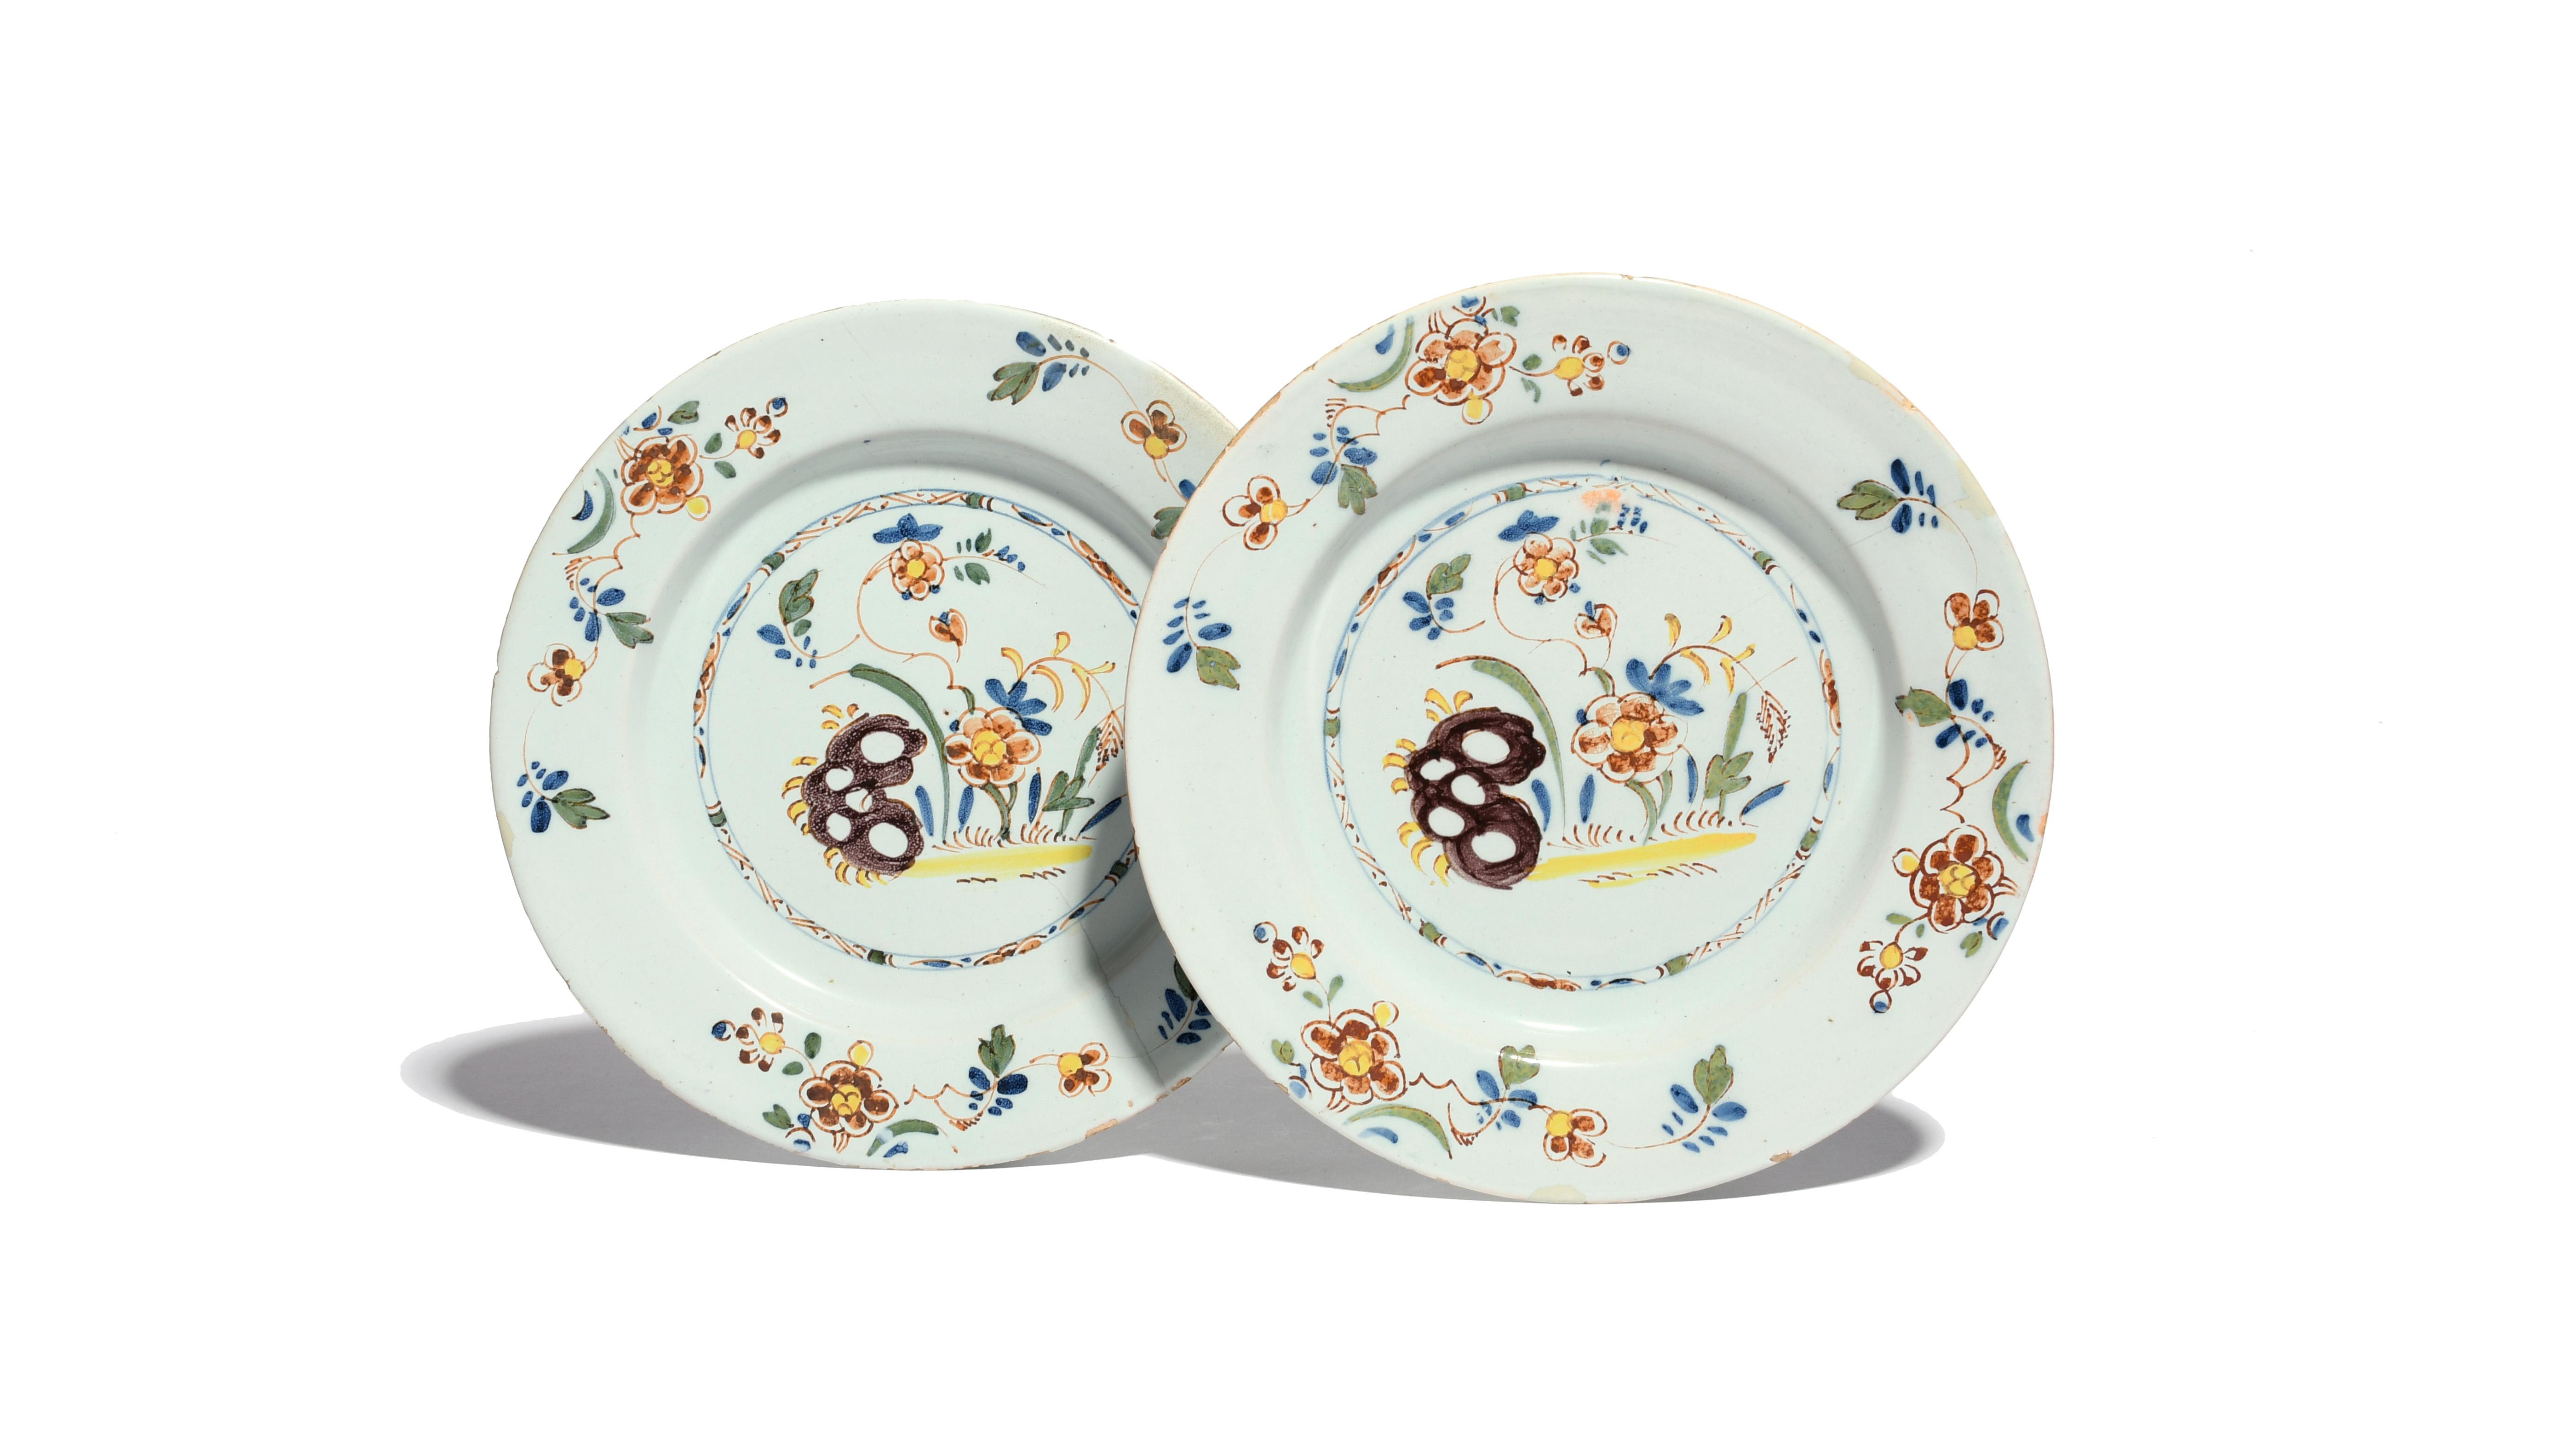 A pair of delftware plates c.1760, painted in polychrome enamels with flowering plants and holey